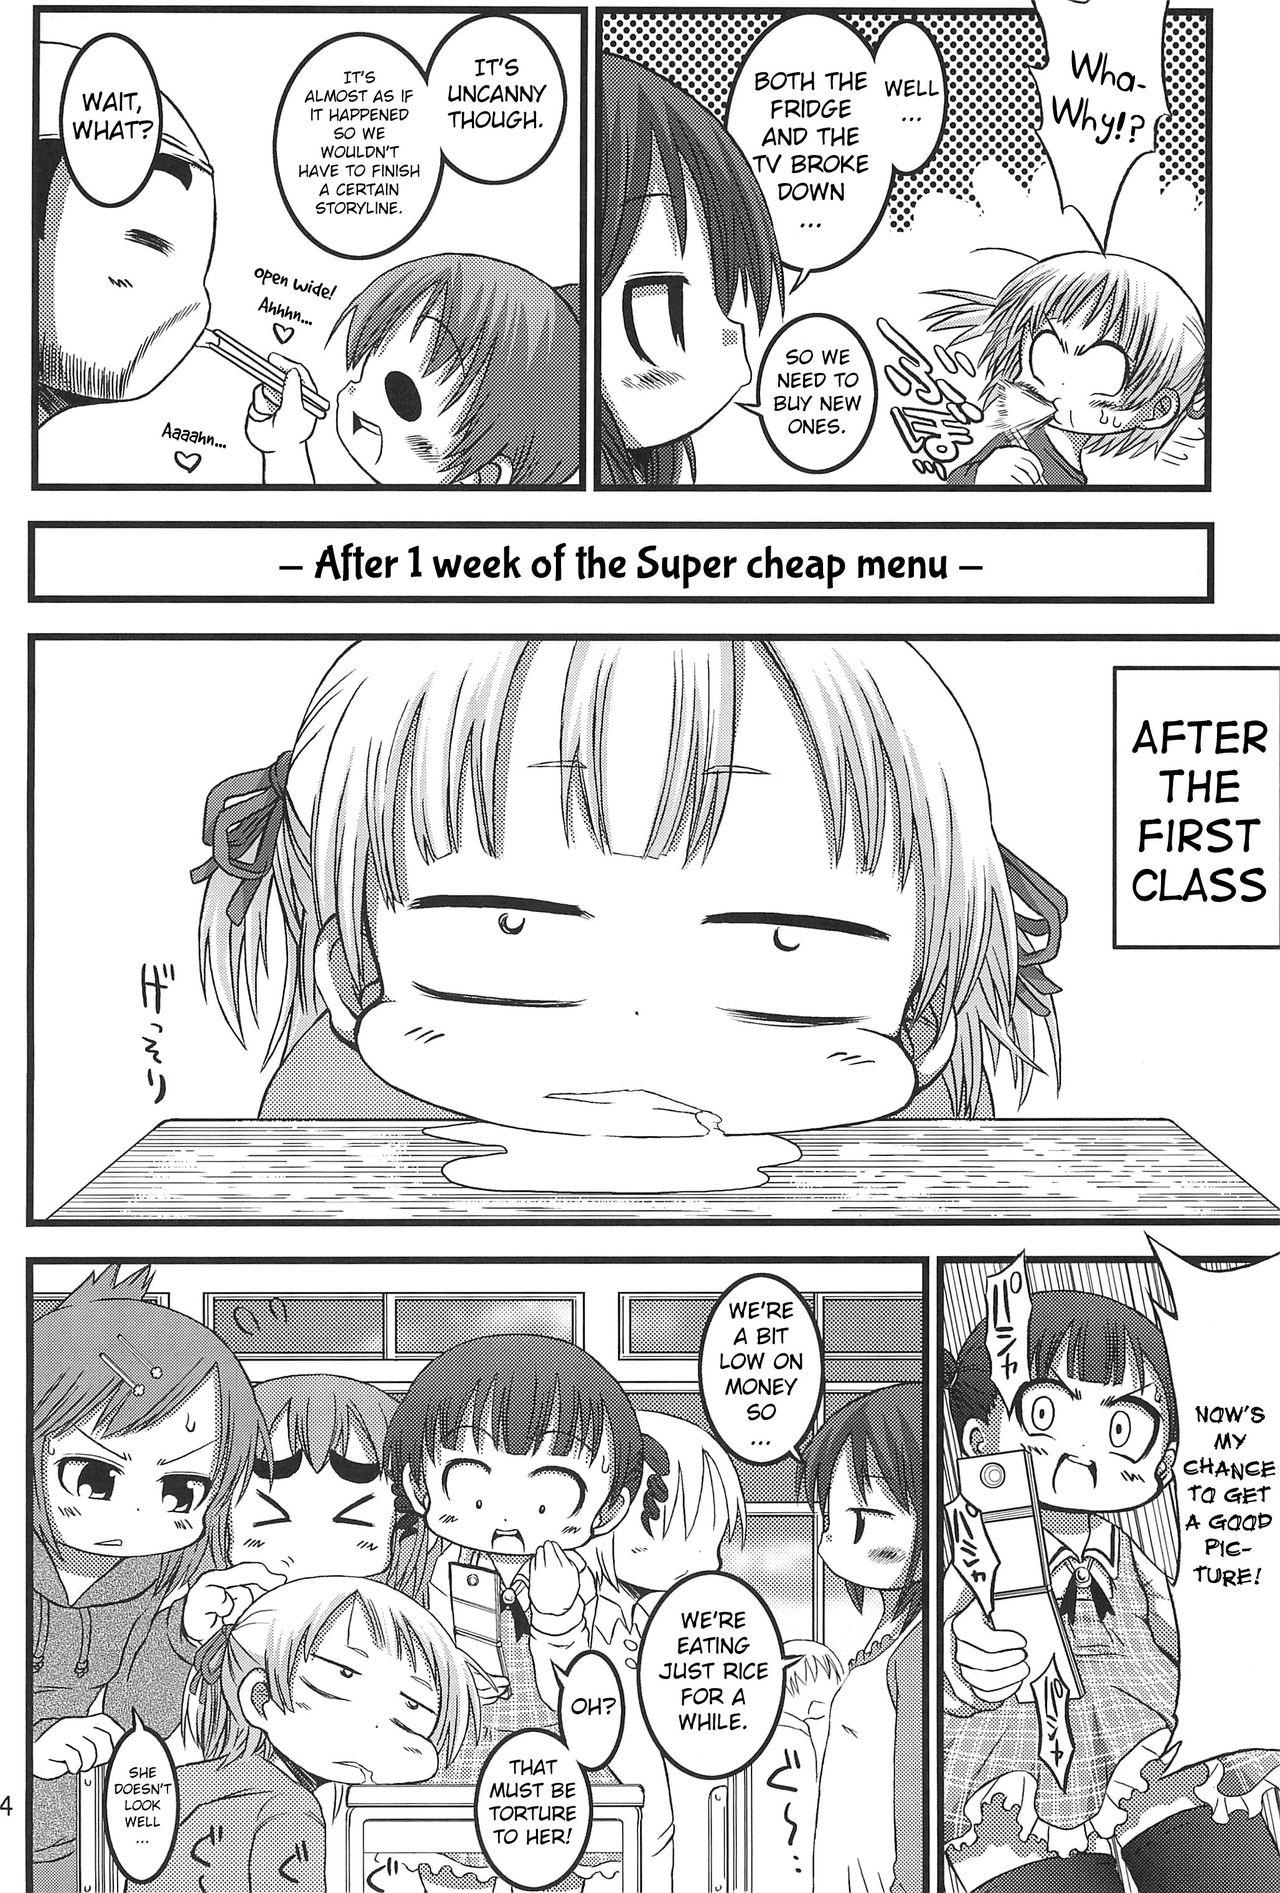 Old Vs Young Micchan Change!! - Mitsudomoe Suck - Page 3